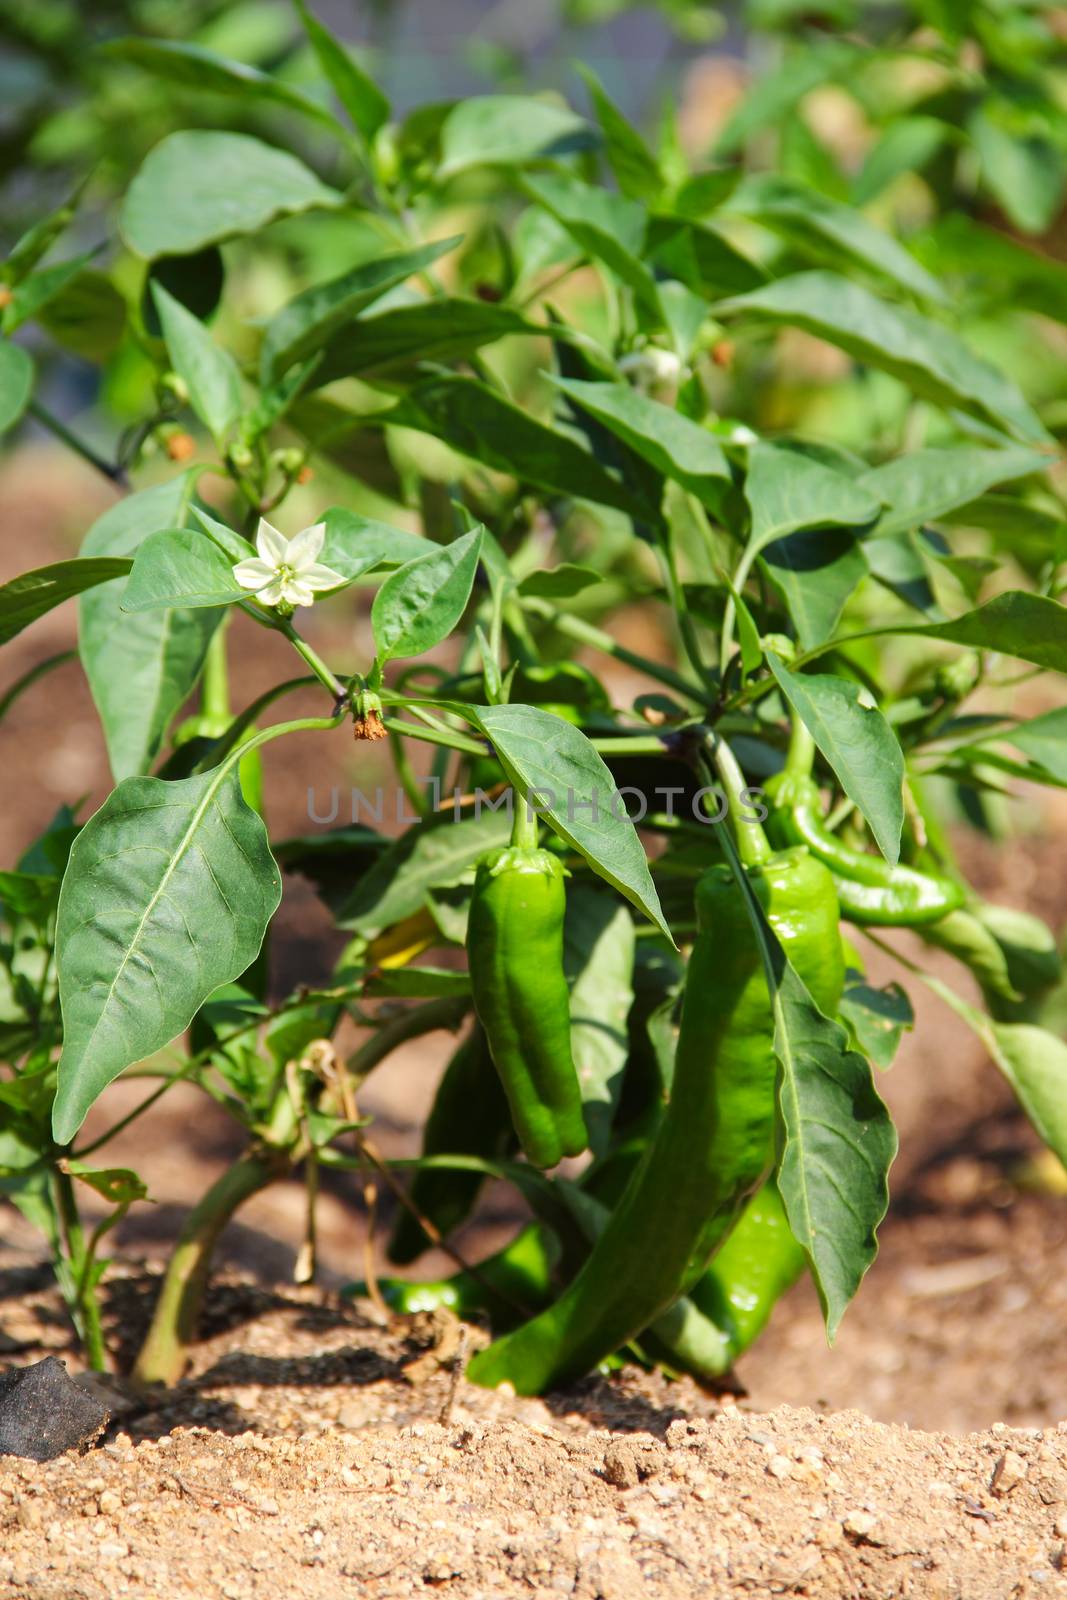 Green pepper plant with fruits in garden outdoors